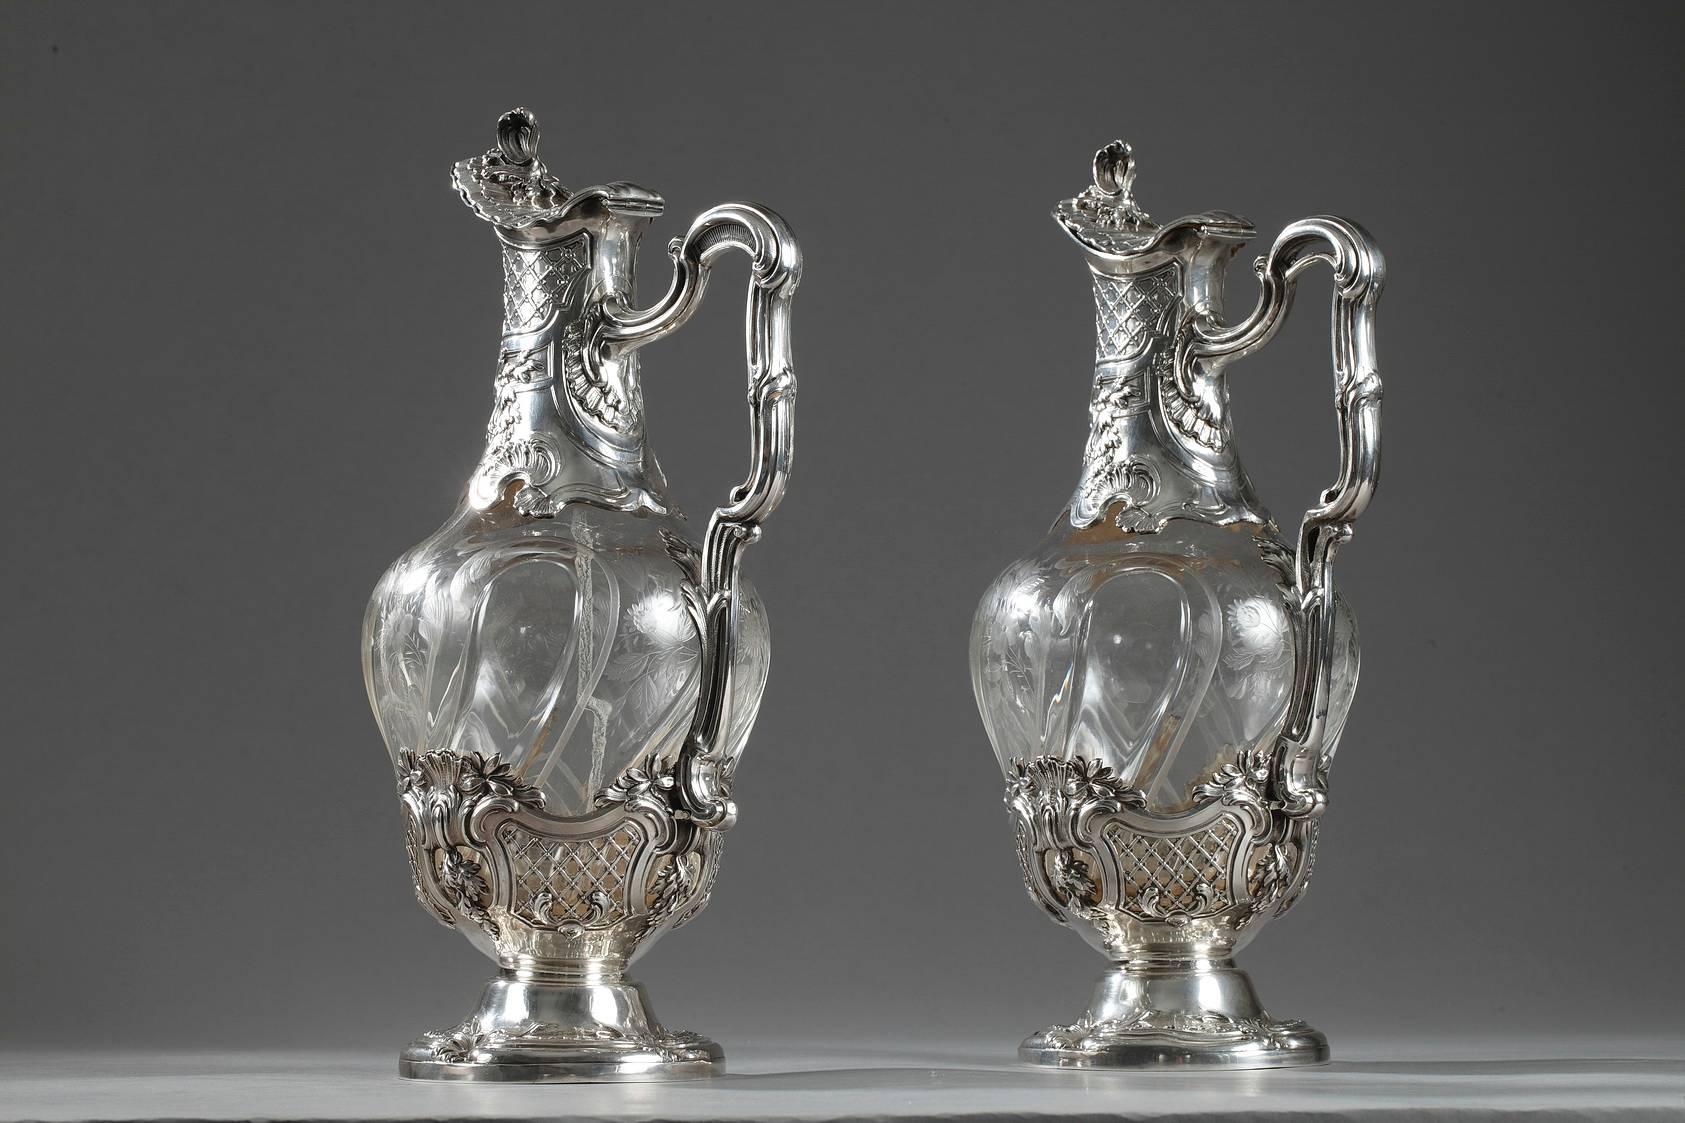 Pair of ewers made of cut crystal and set in silver mounts. The crystal body is engraved with wide curving grooves, flowers, and foliated branches. The silver neck and the base are decorated with sculpted latticework, shells, and foliage. The lid is